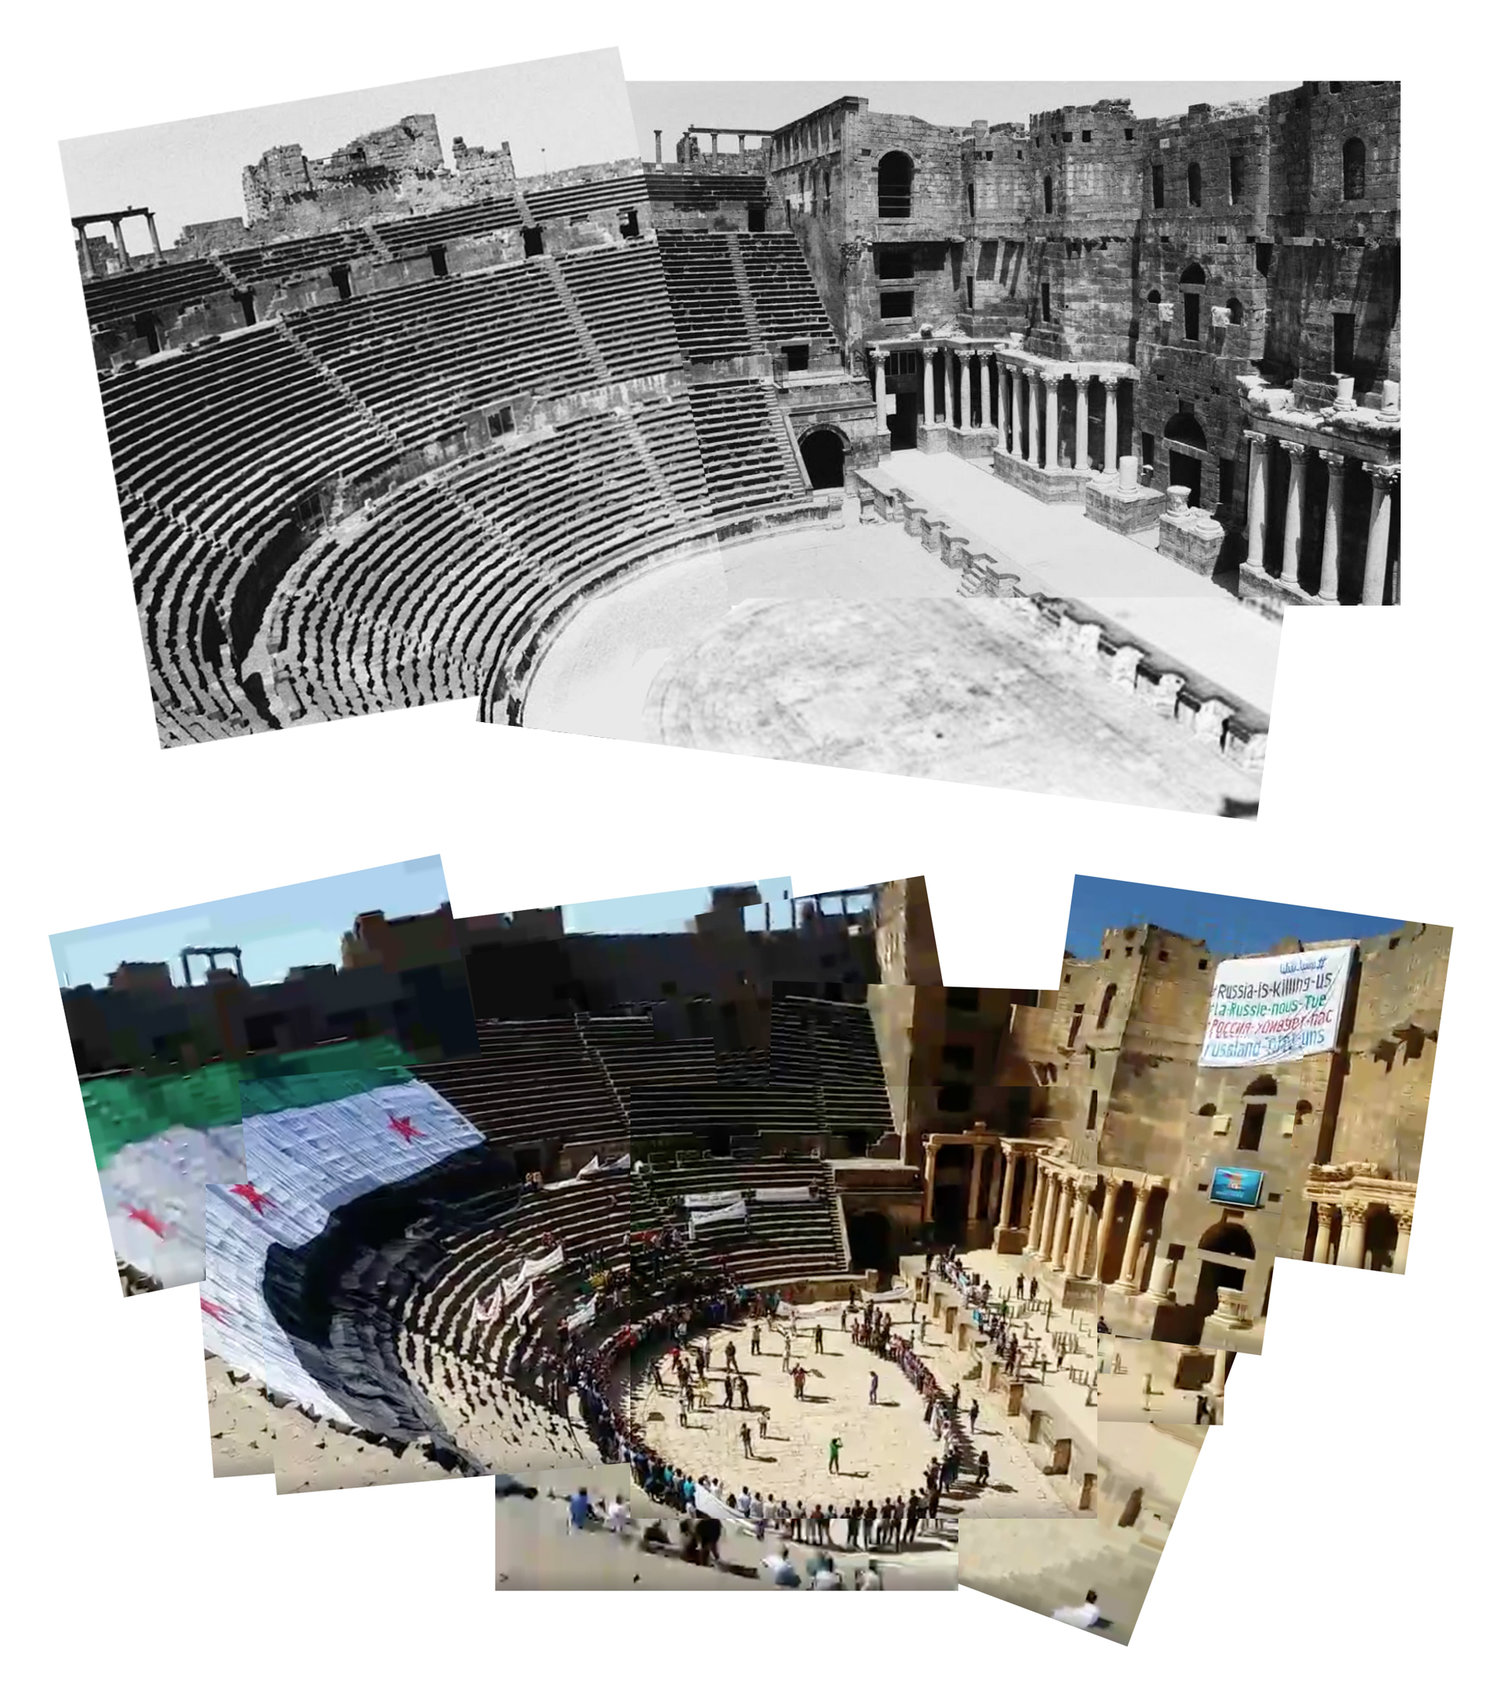 Top image: Typical representation of Bosra al-Sham Roman amphitheater as a static, objectified and museumified historic space. Image source: Flickr Bottom Image: Representation of the historic space transformed by local community organizers. The historic space is reactivated as a site of popular assembly and political mobilization, appropriated for the purpose of a collective cause through the incorporation of political slogans, songs, flags and banners into the space which are “prohibited” by the state. Source: Facebook LiveStream